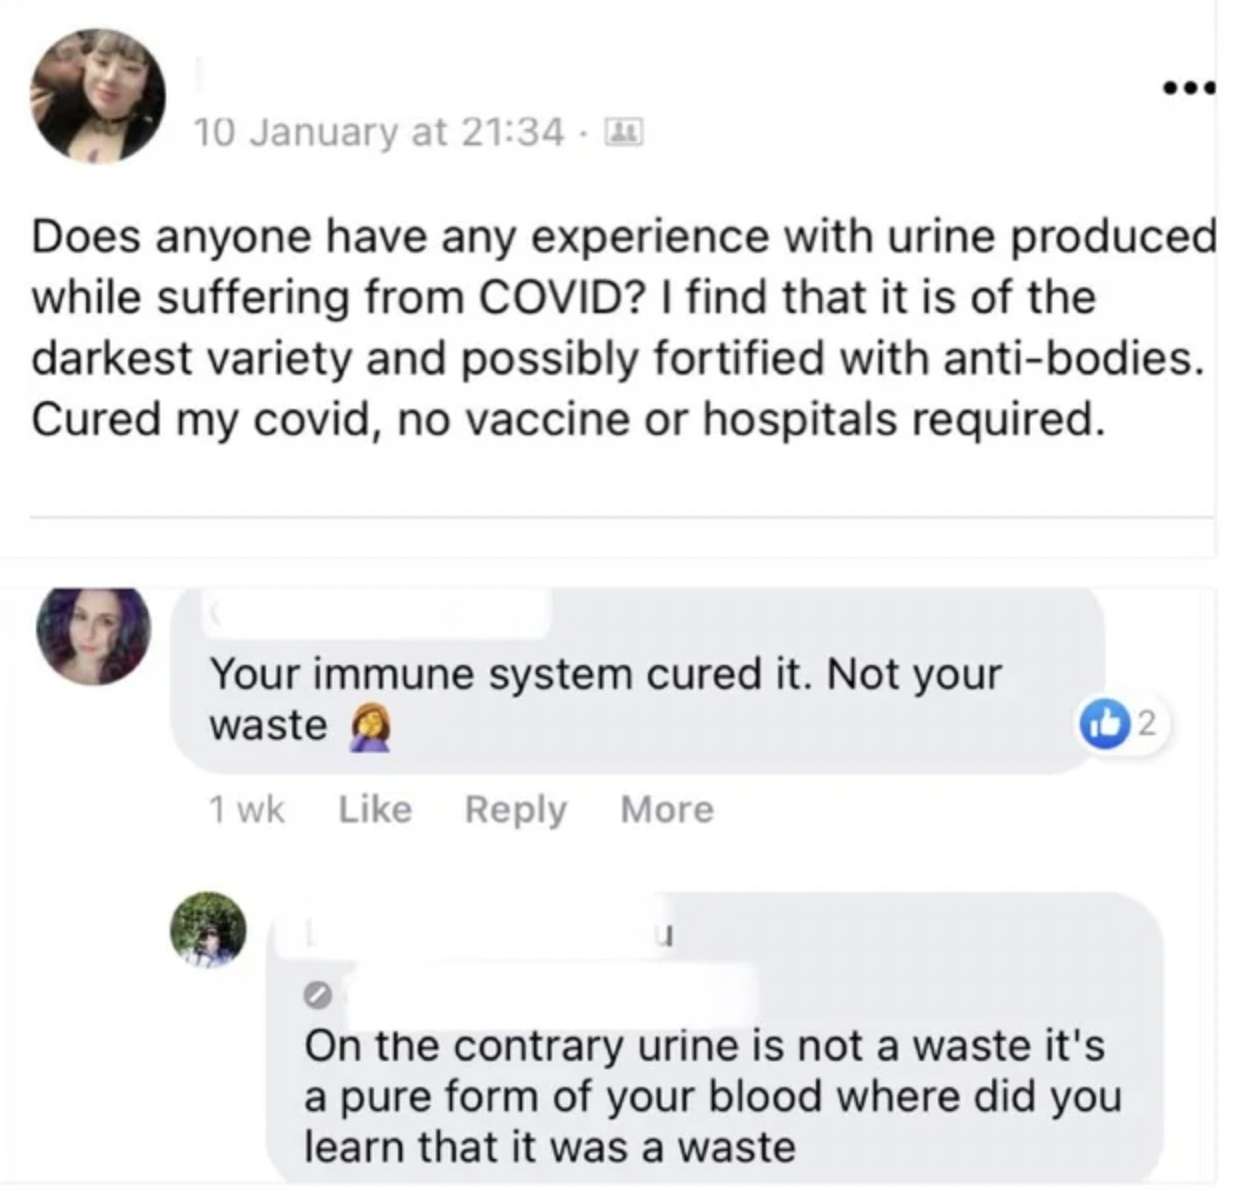 Confidently Incorrect - does anyone have any experience with urine produced while suffering from Covid? I find that it is of the darkest variety and possibly fortified with antibodies. Cured my covid, no vaccine or hospitals required. Your immune syste